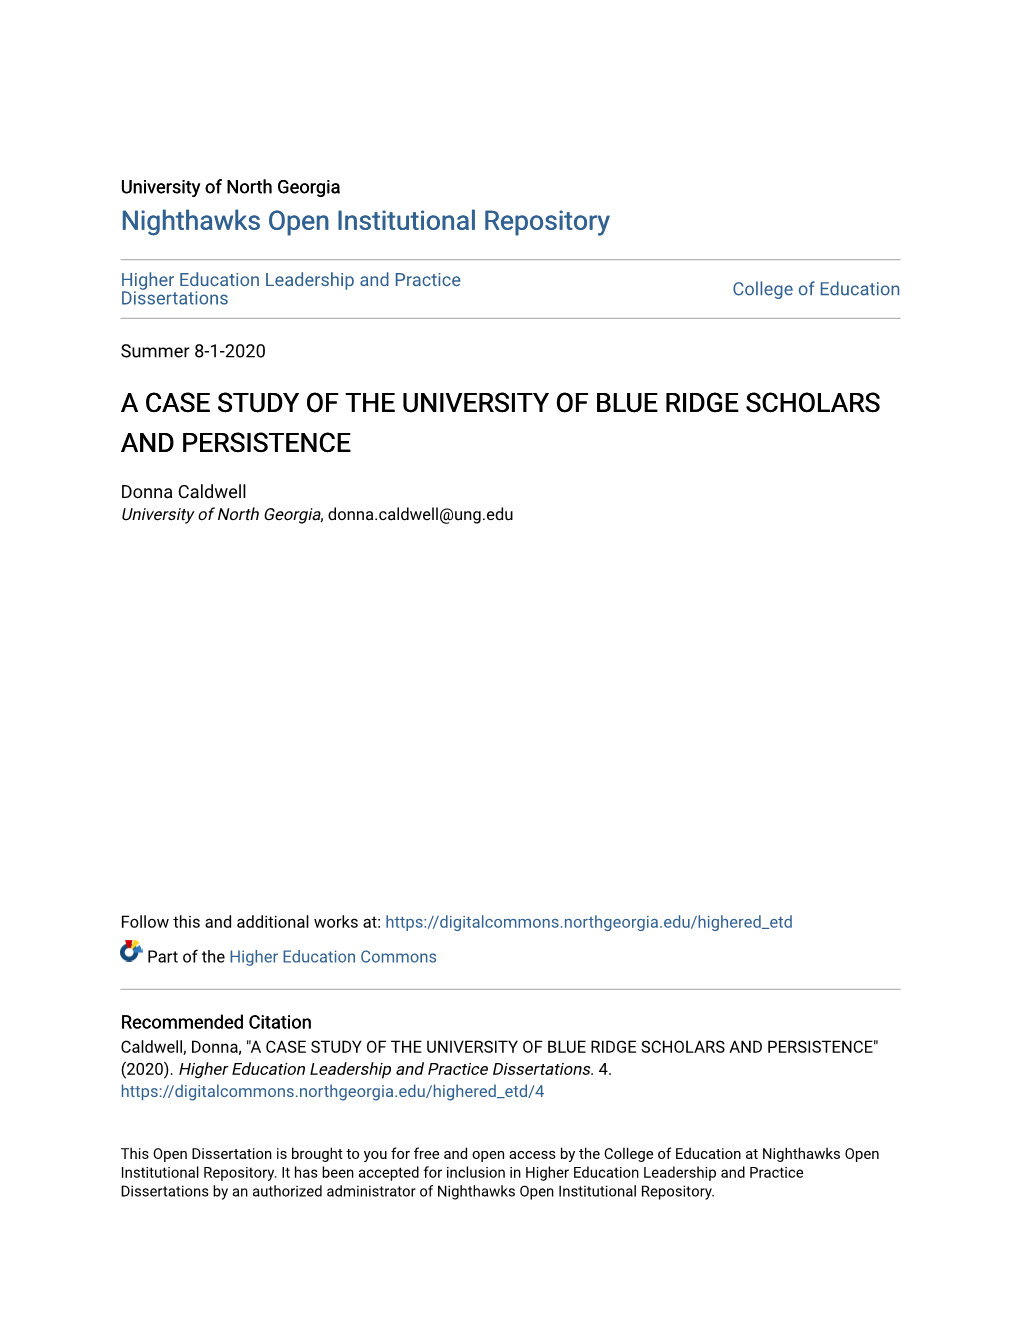 A Case Study of the University of Blue Ridge Scholars and Persistence